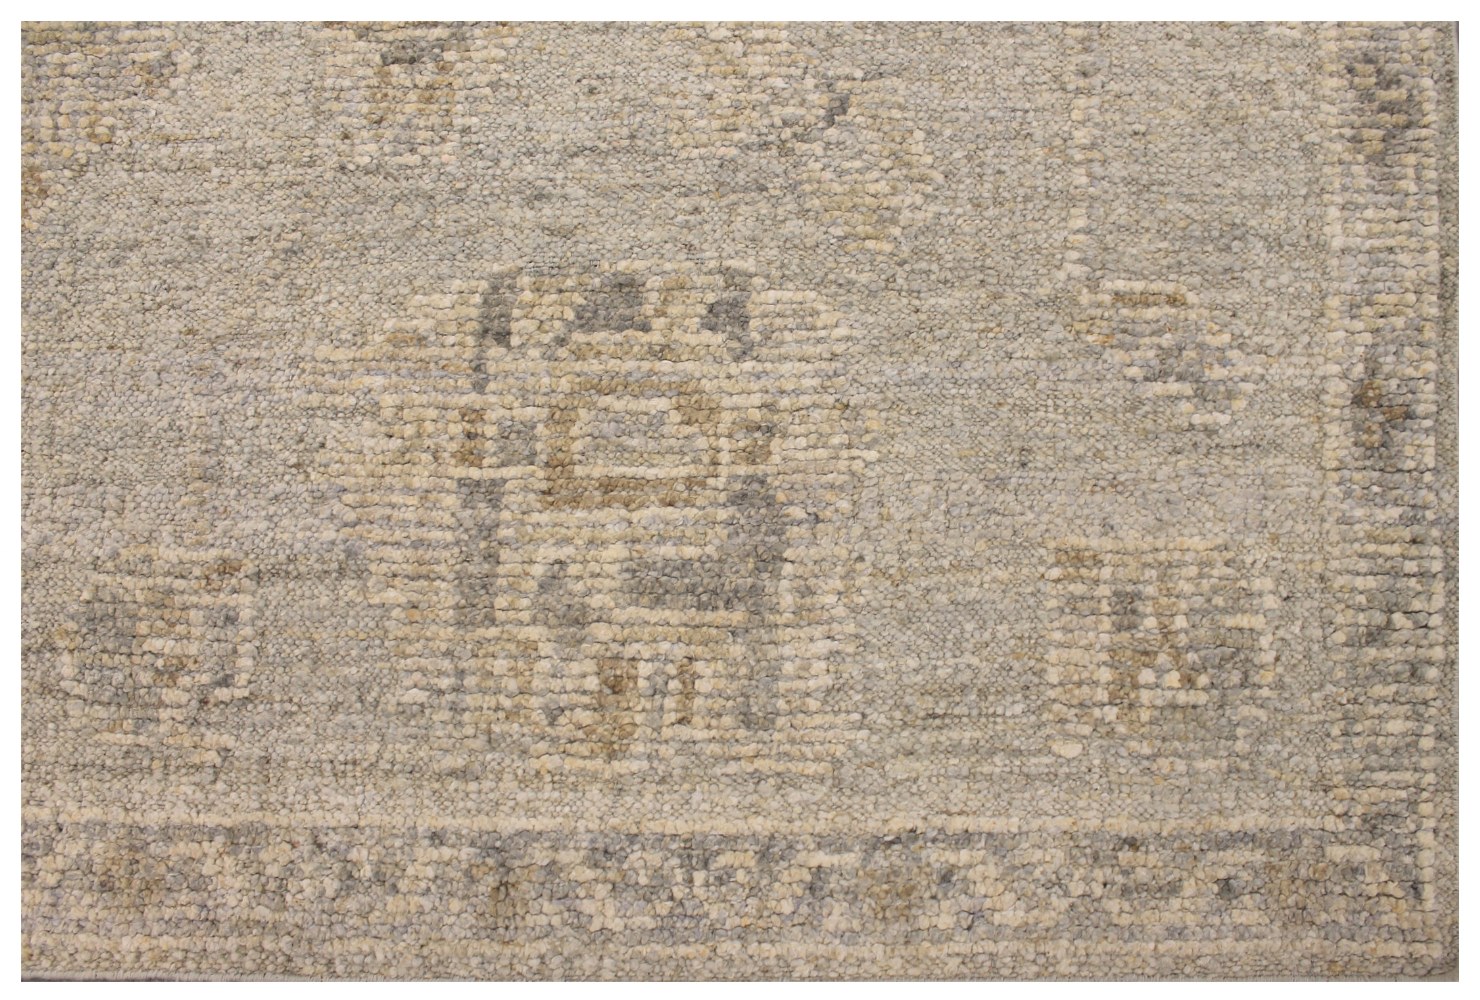 9x12 Oushak Hand Knotted Wool Area Rug - MR028642